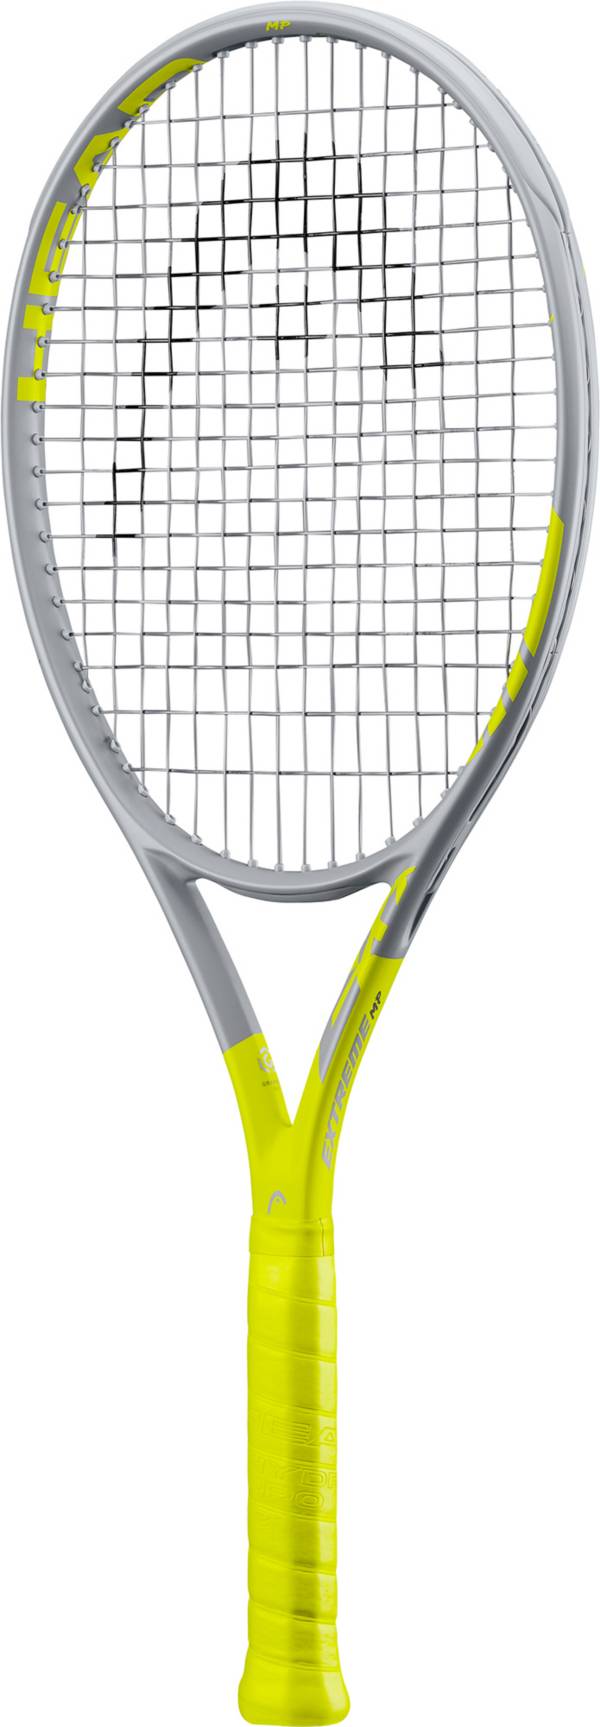 Head Graphene Extreme MP Racquet - Unstrung | Dick's Sporting Goods